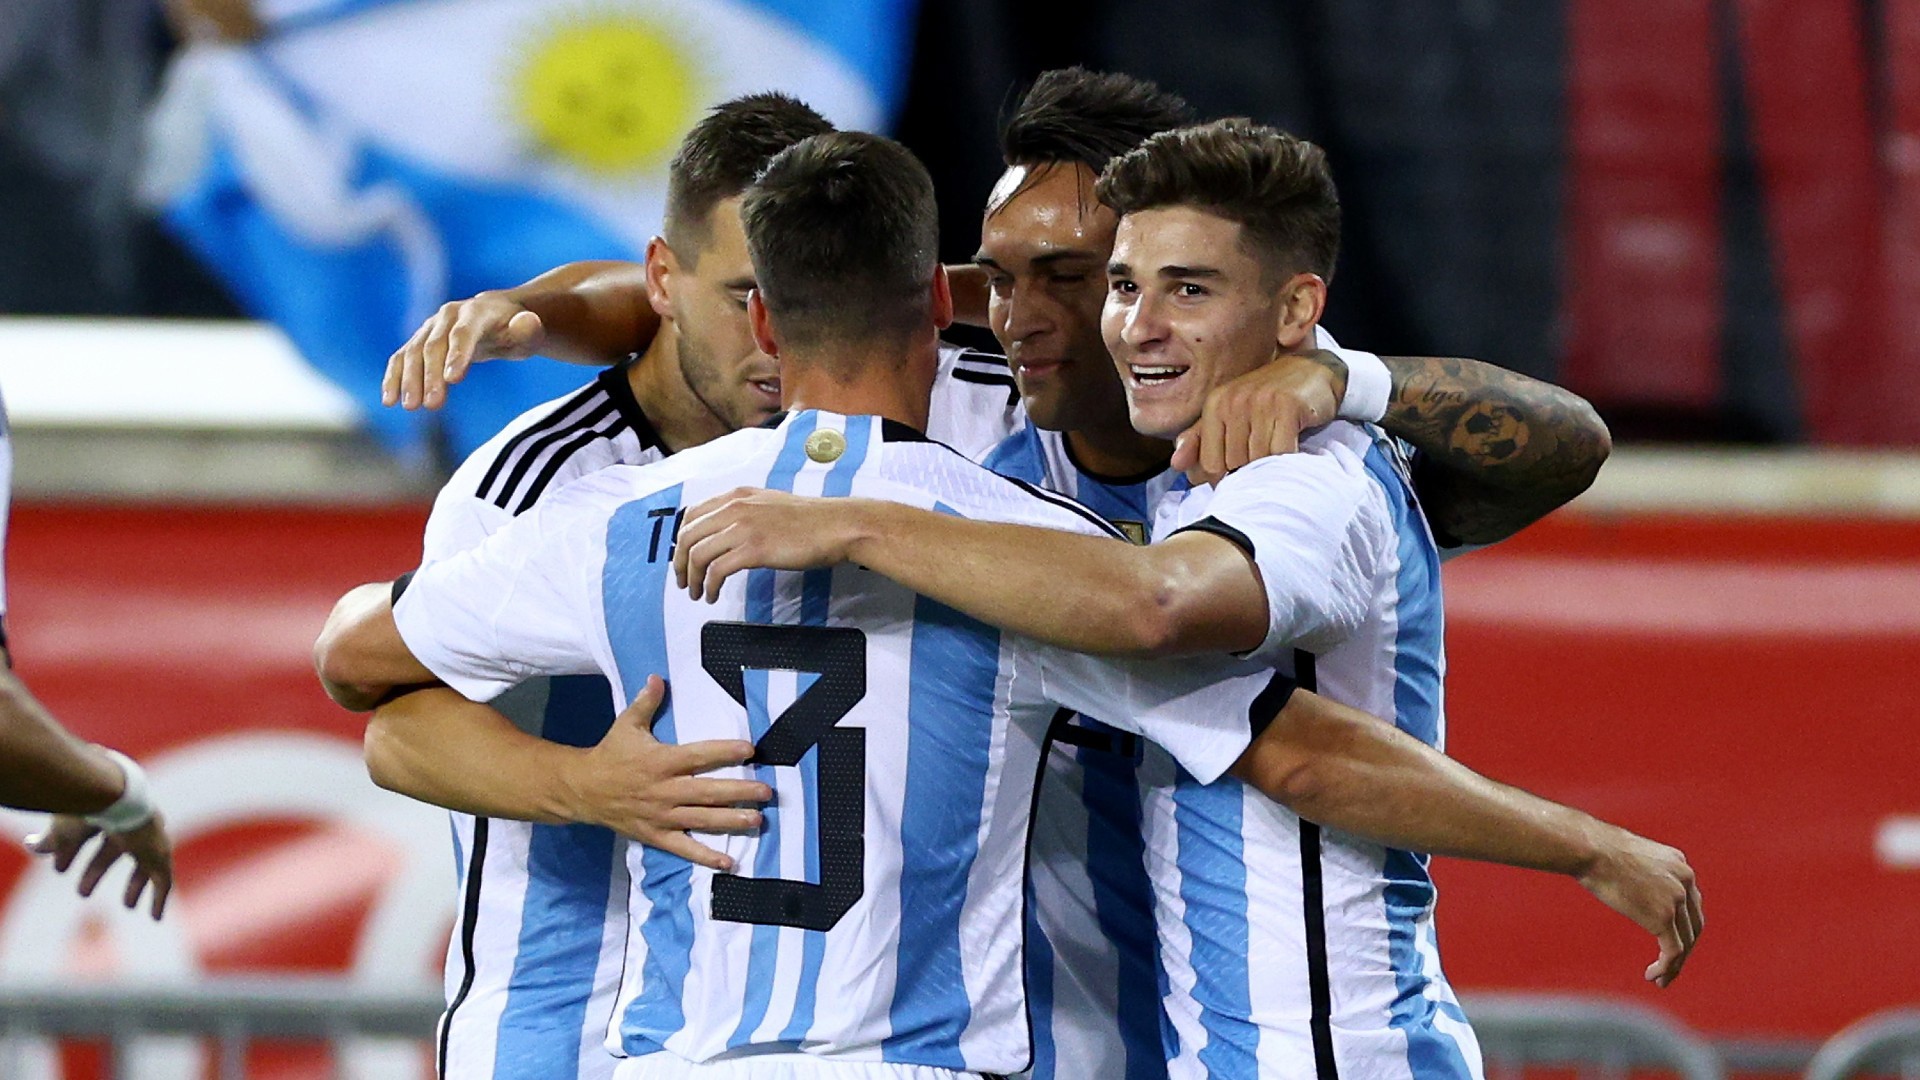 Julian Alvarez's perfect partnership with Lionel Messi has been key to  Argentina's success in reaching the World Cup final, Football News